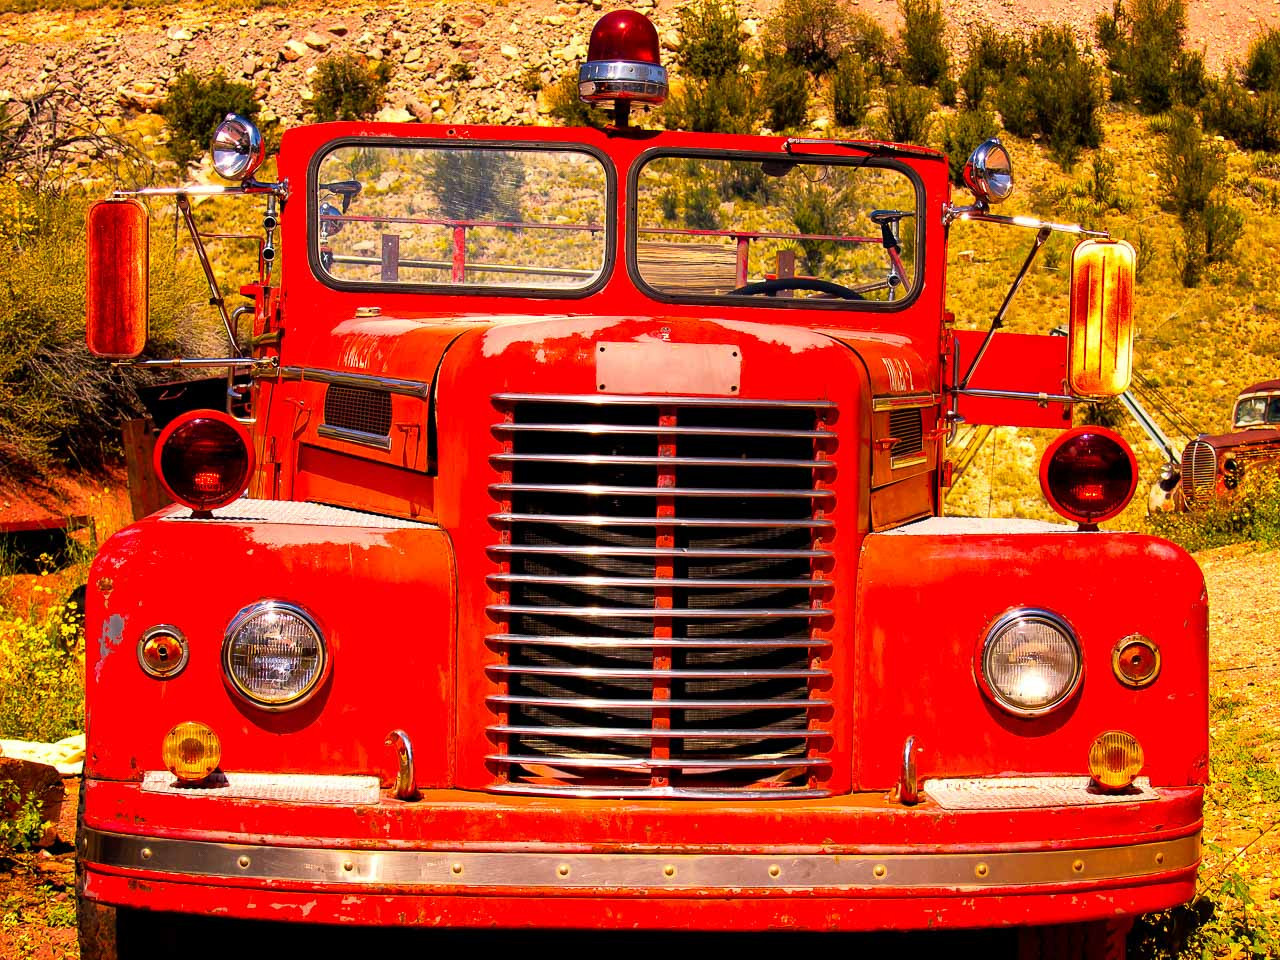 Vintage Fire Truck - Gold King Mine & Ghost Town